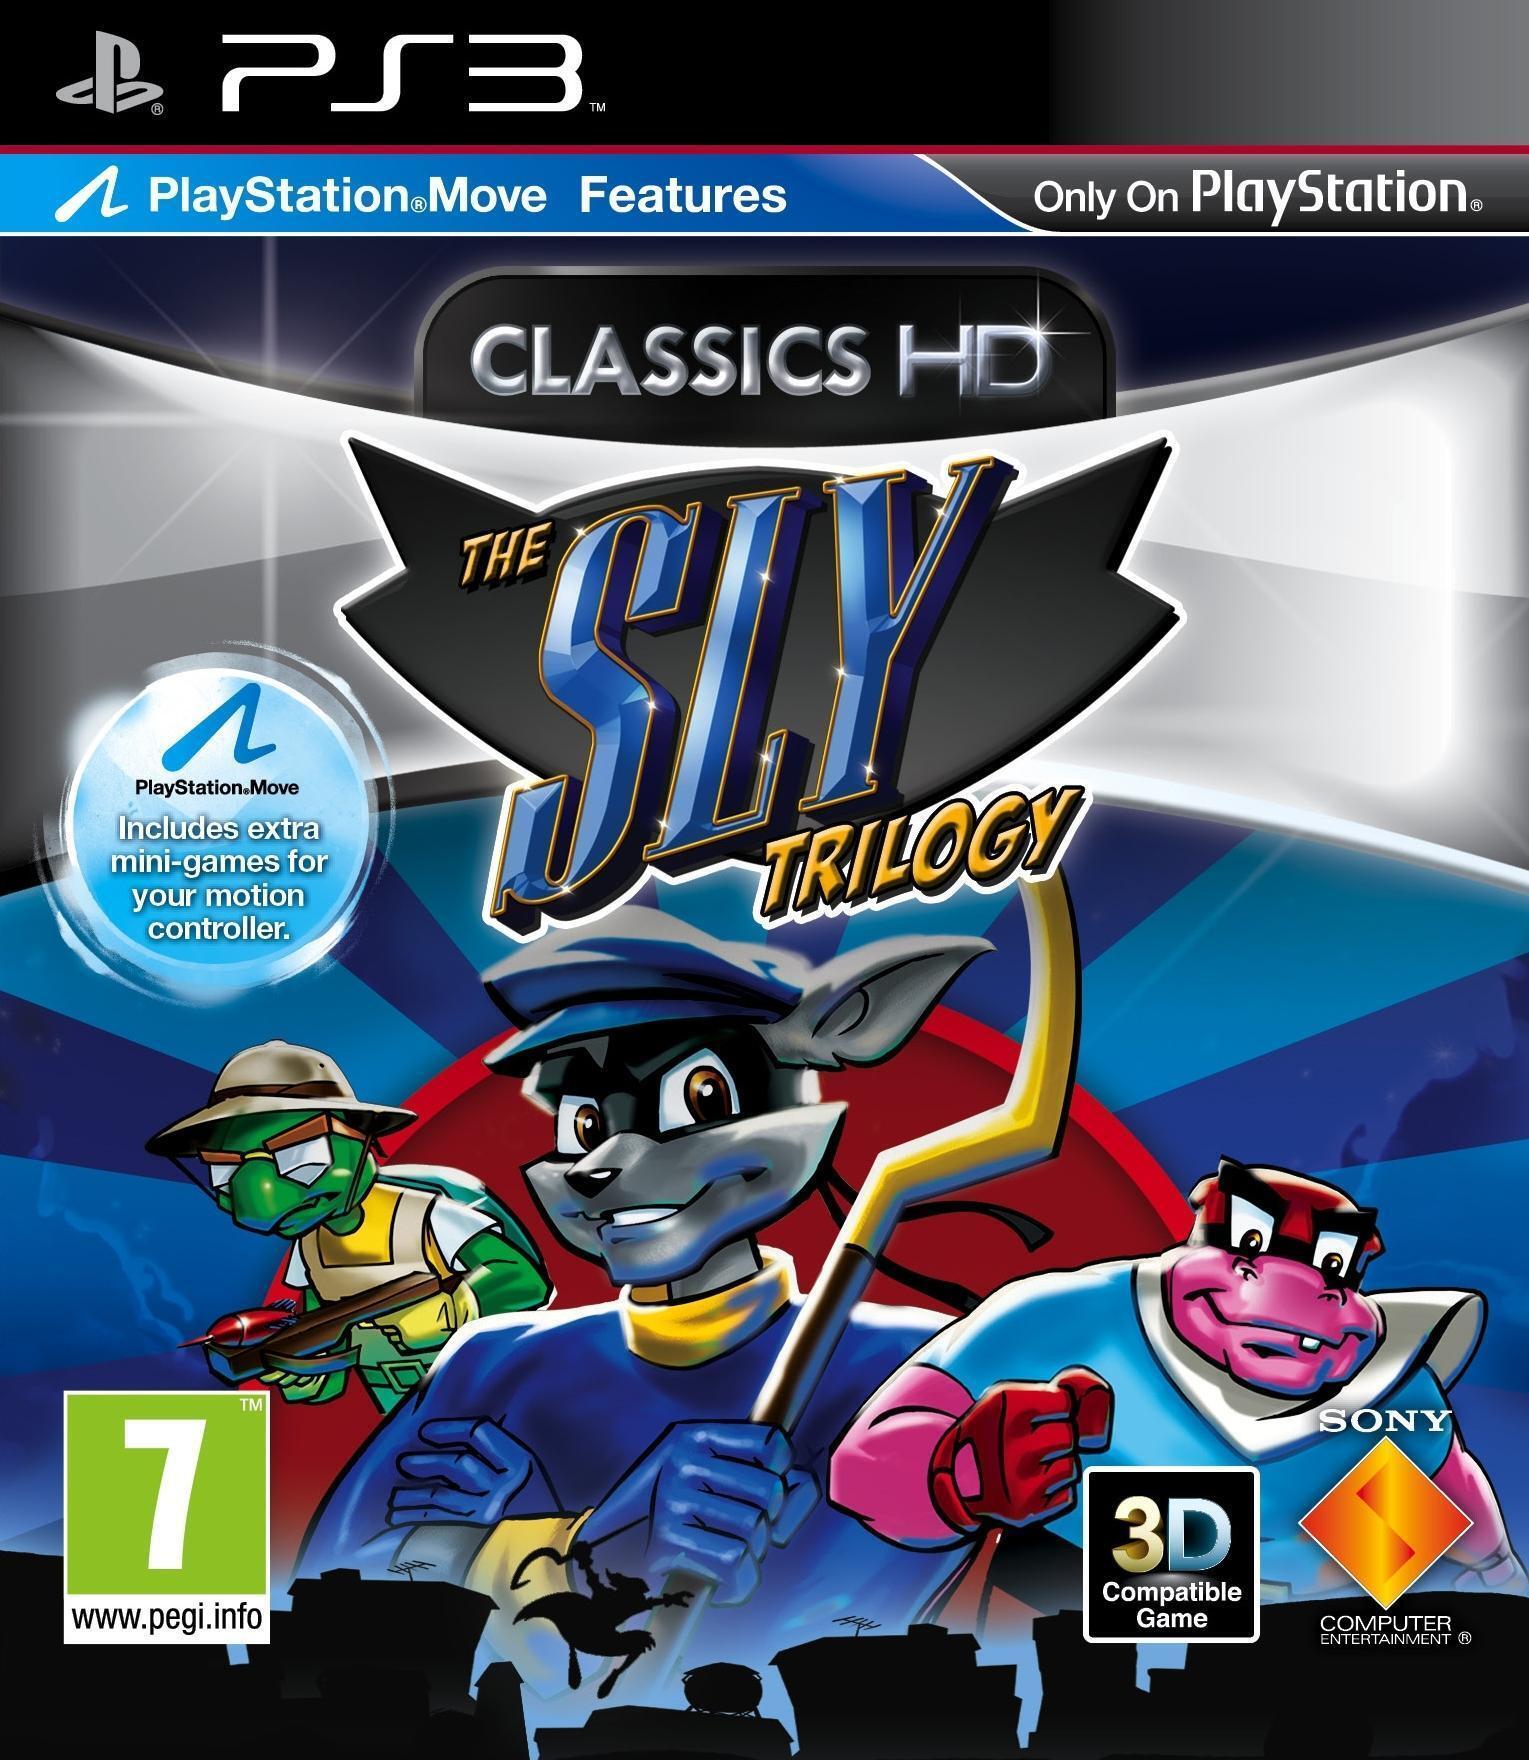 Sony The Sly Trilogy PlayStation 3